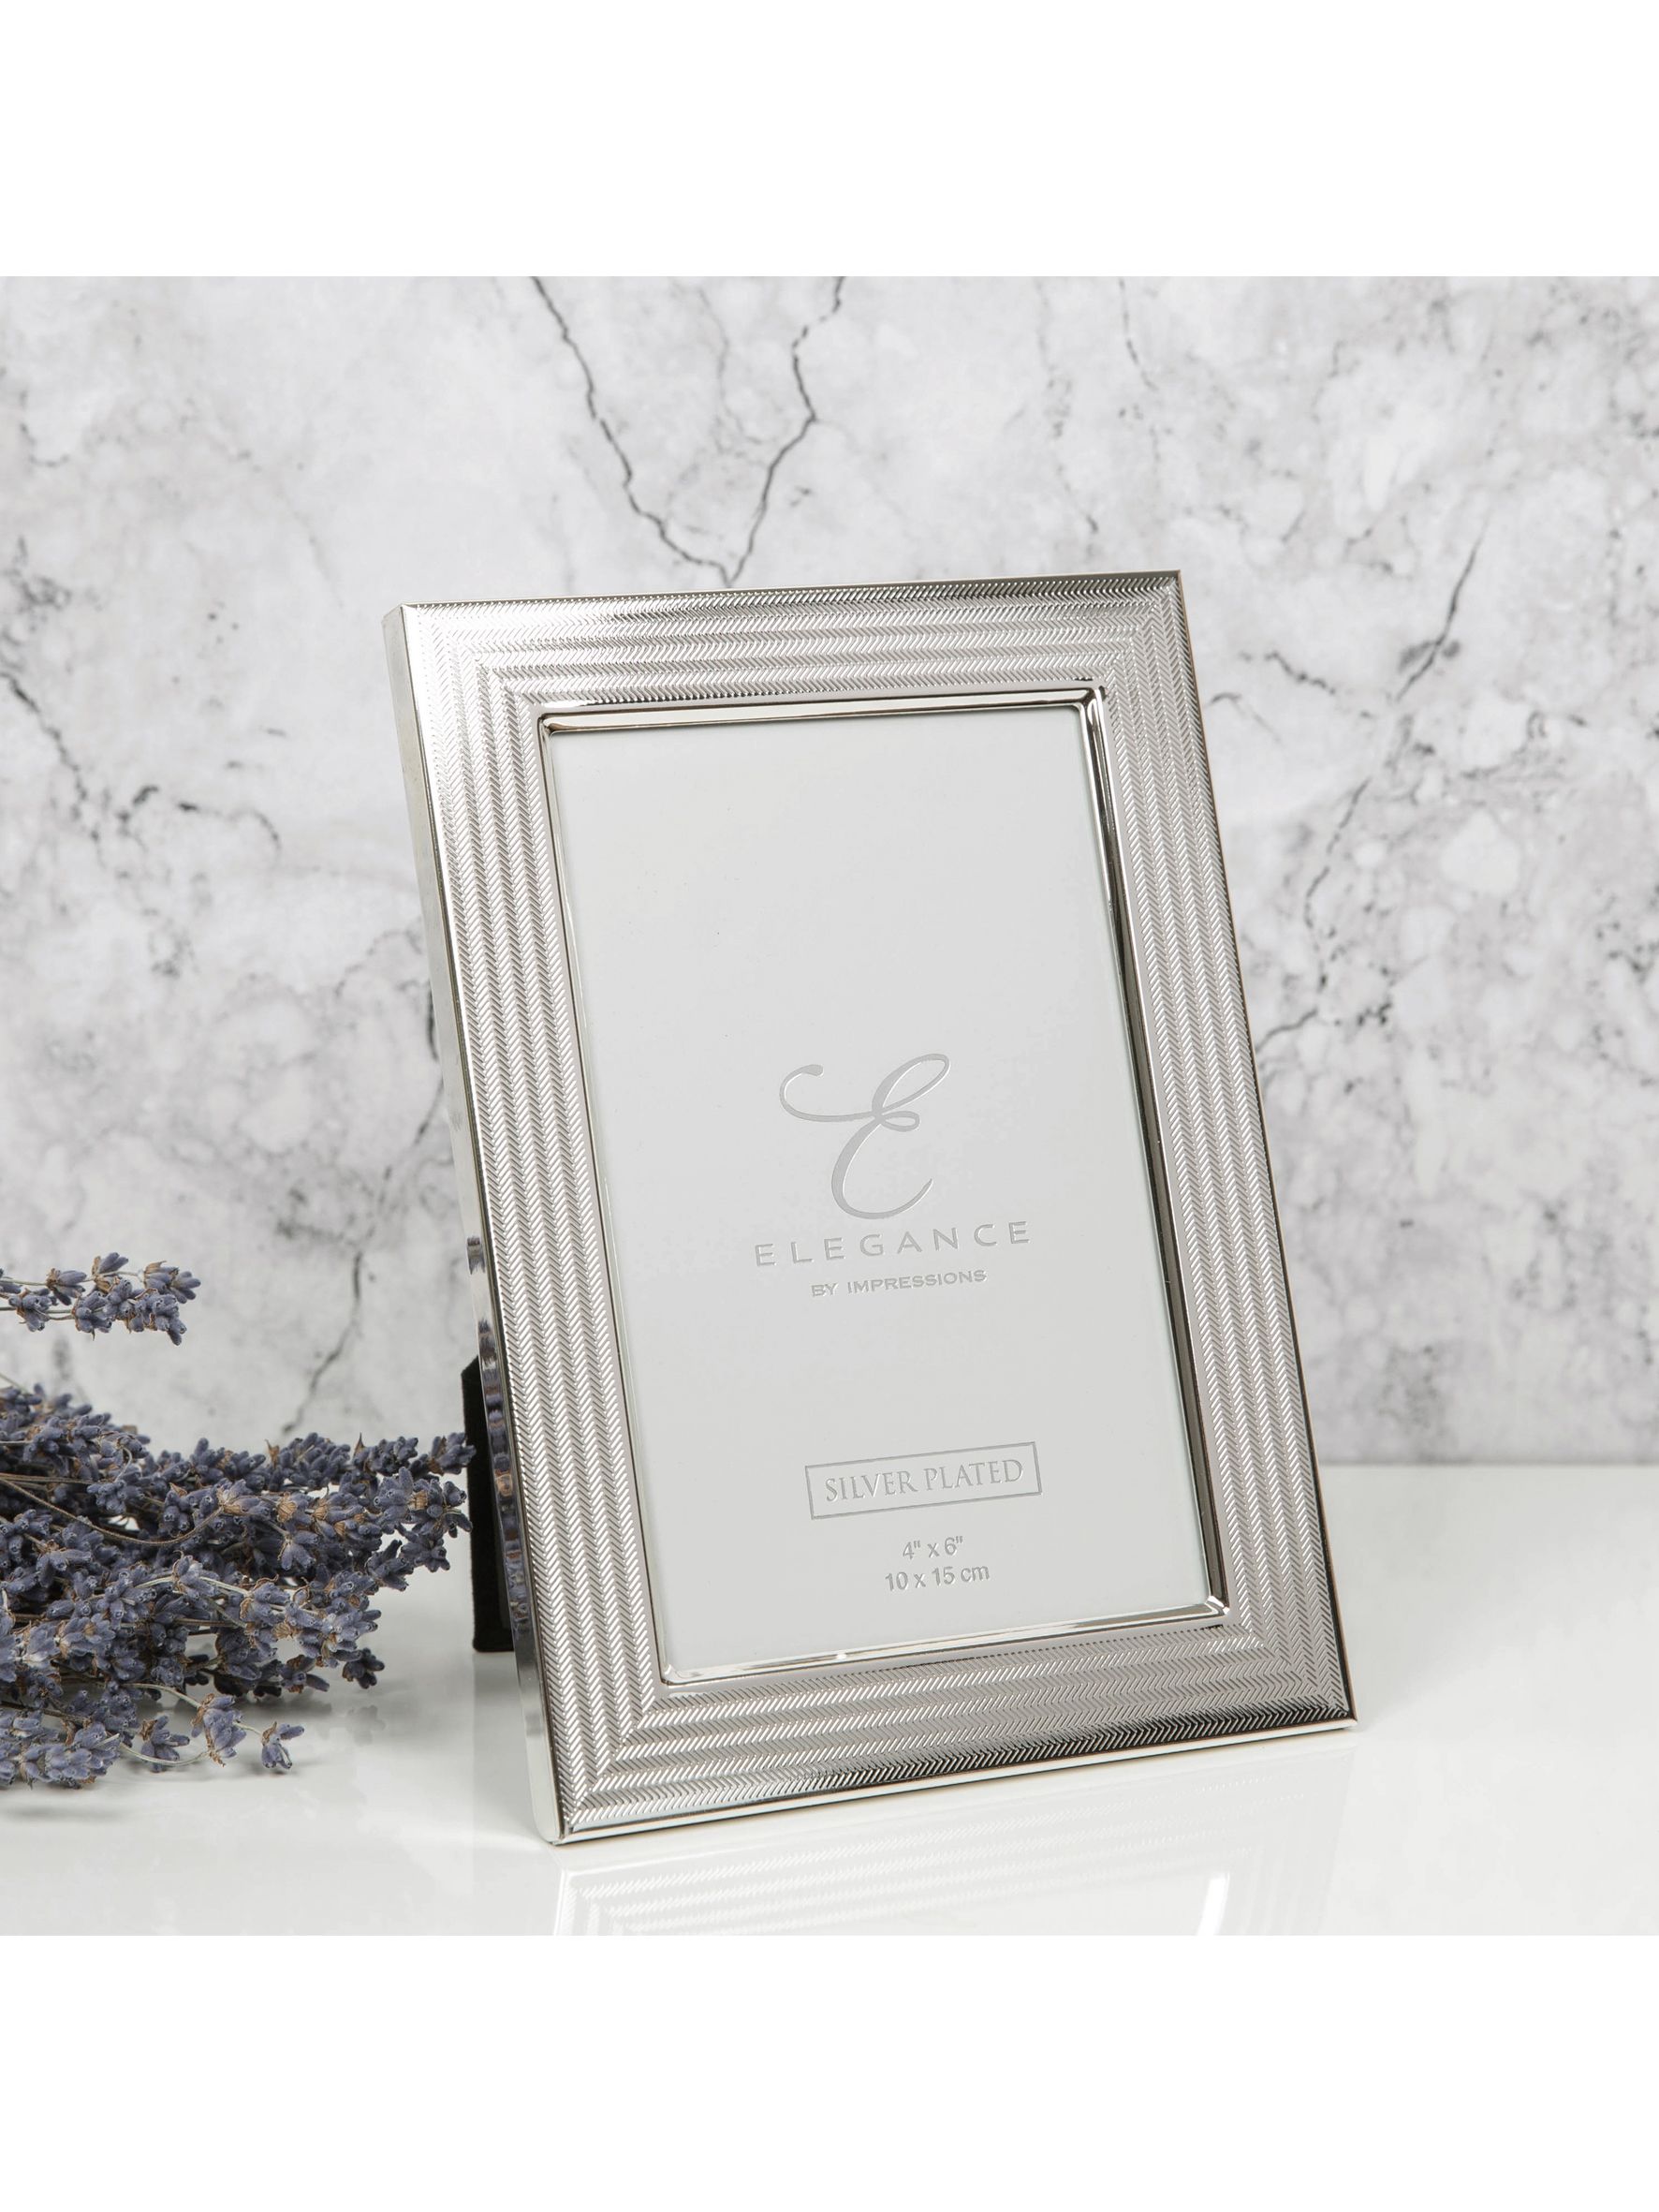 Photo frame 6x4 glass photo frame is very suitable for home wedding office  restaurant business silver